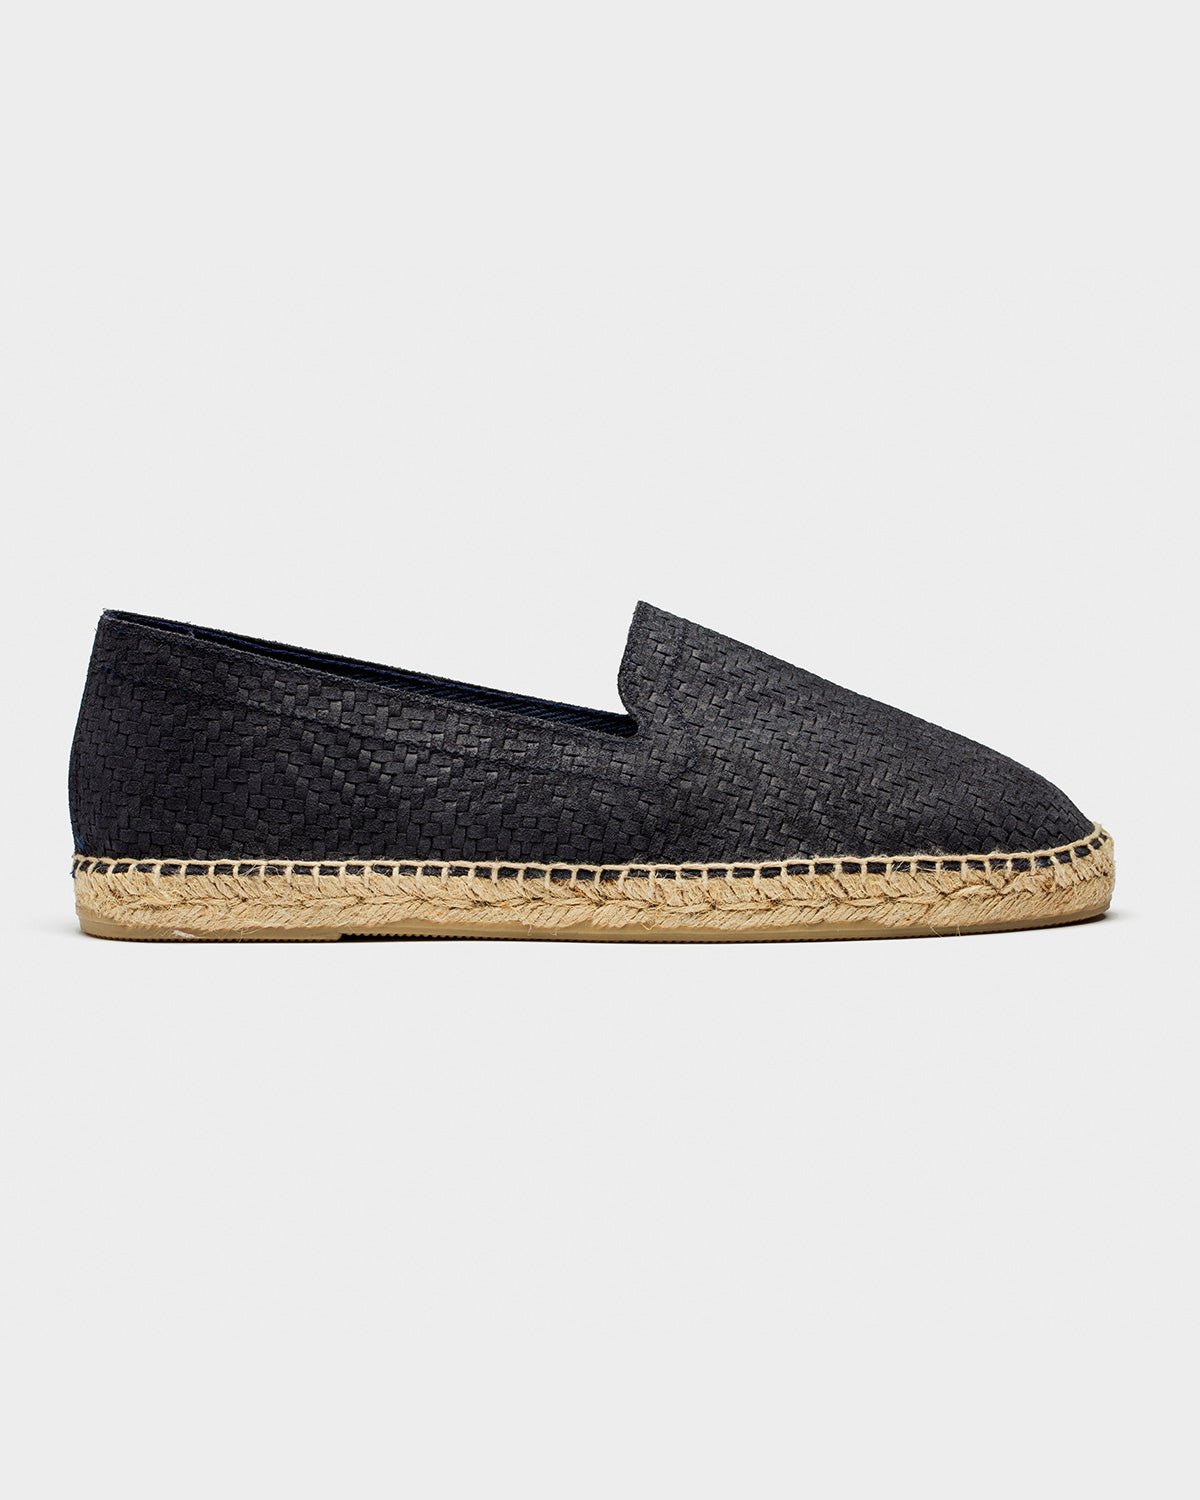 Braided Leather Espadrilles Navy - THE RESORT CO